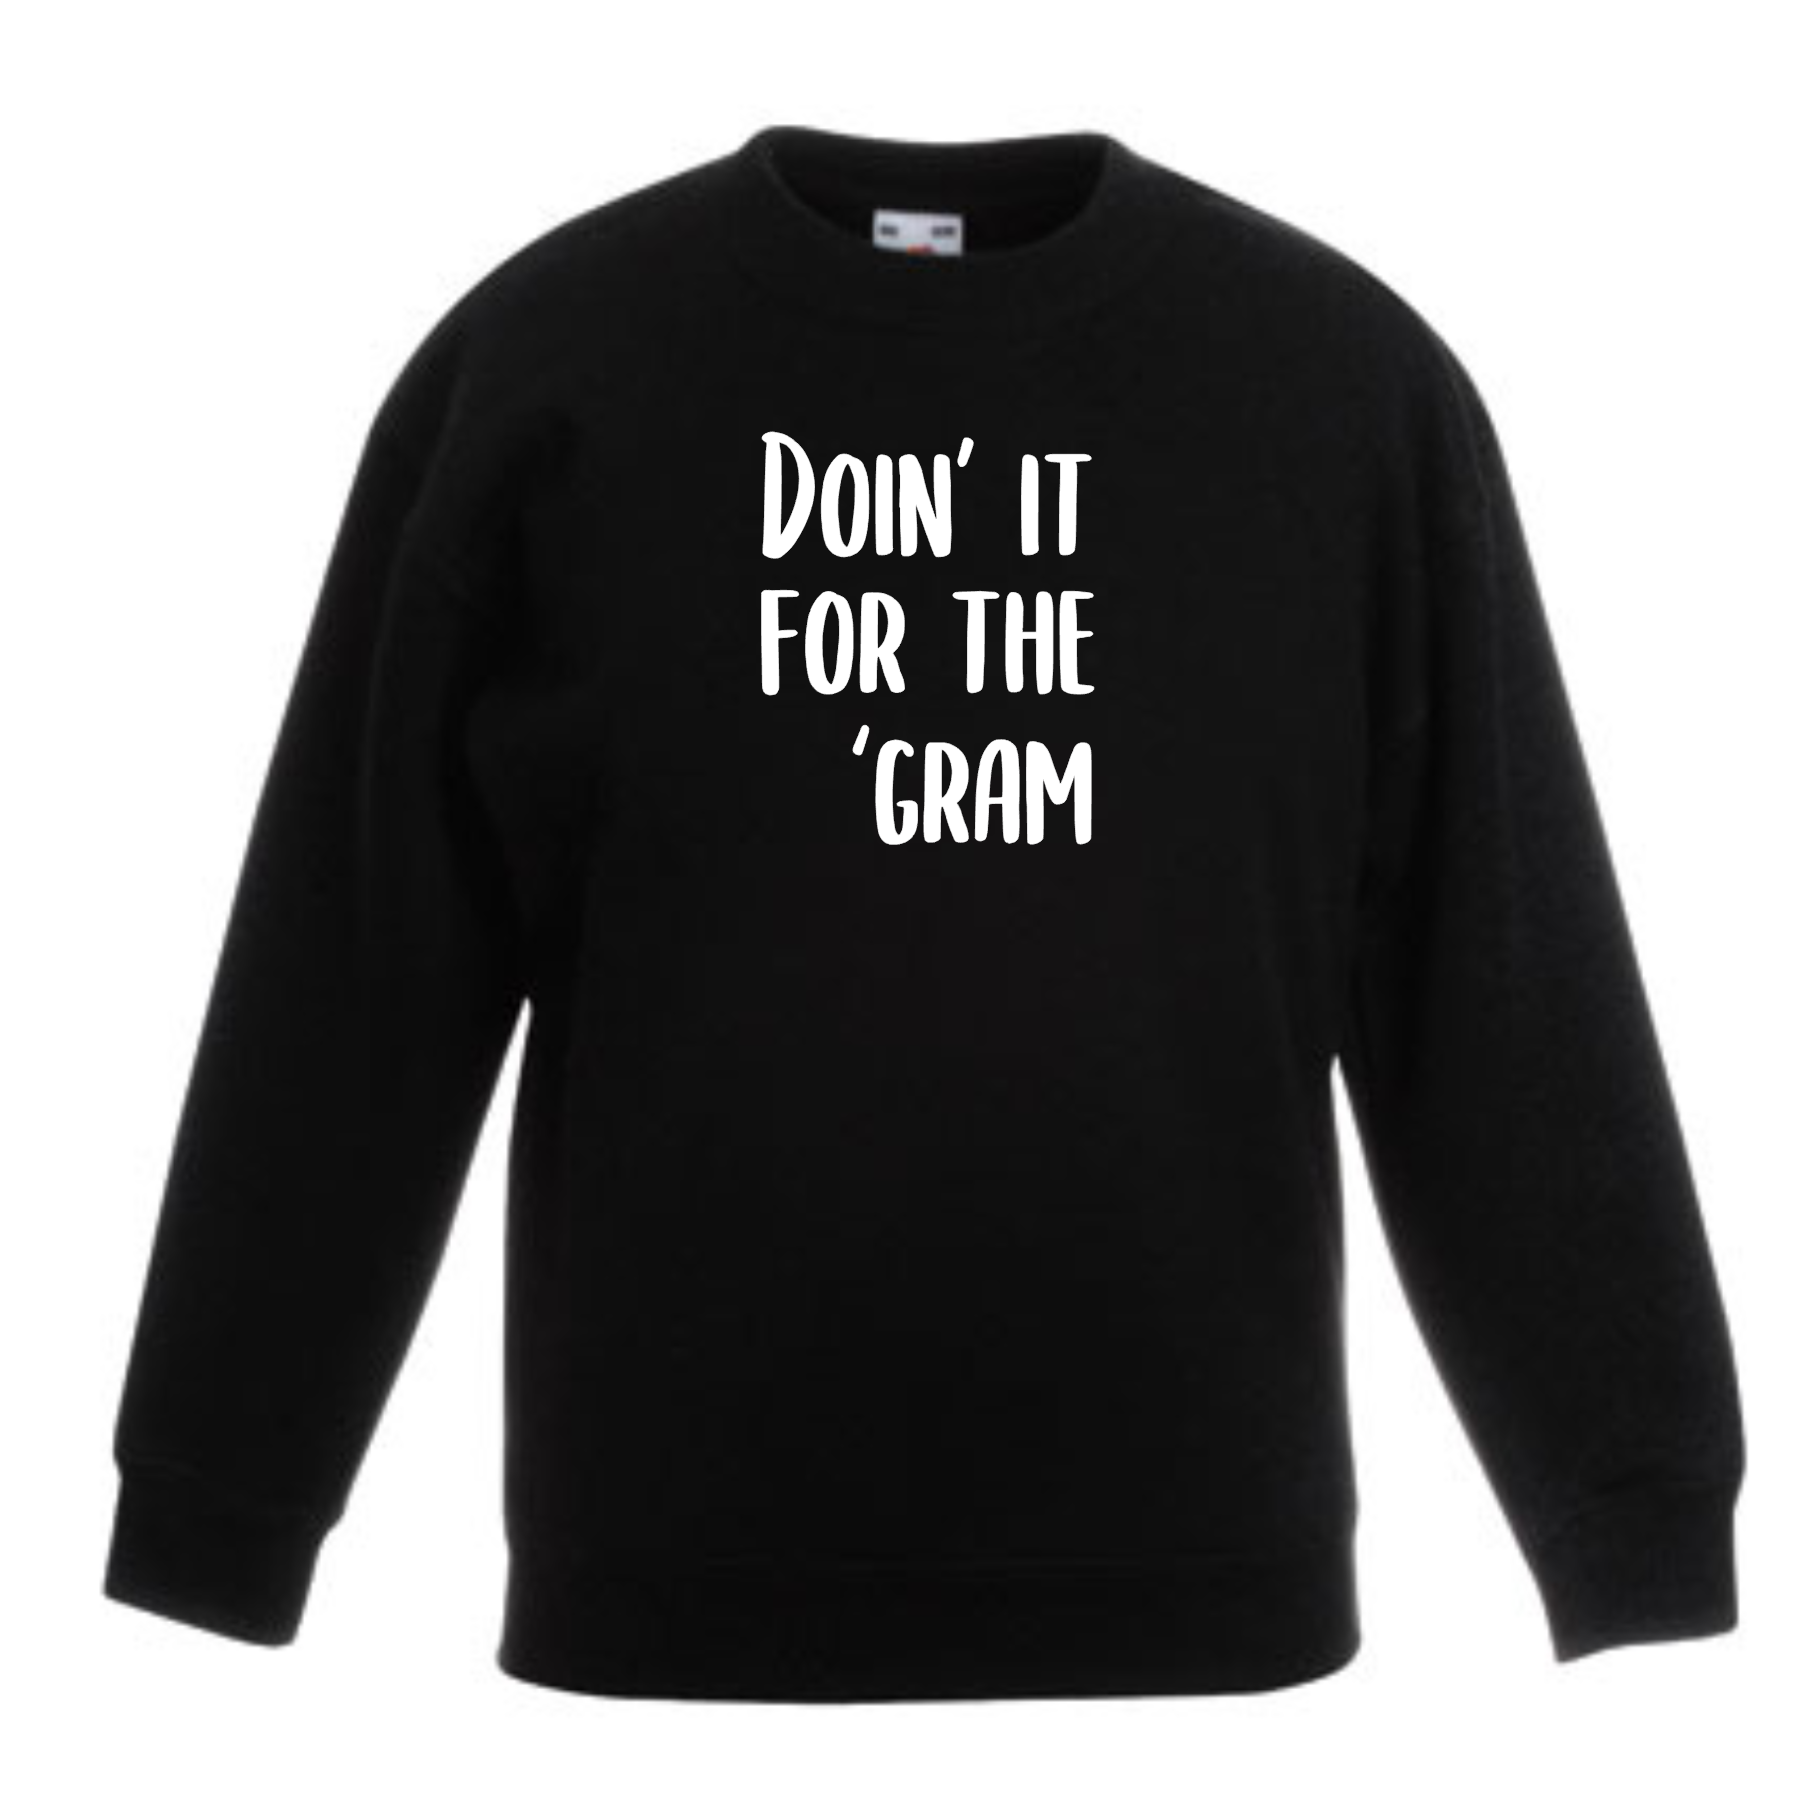 Kids sweater – Doin’ it for the ‘gram